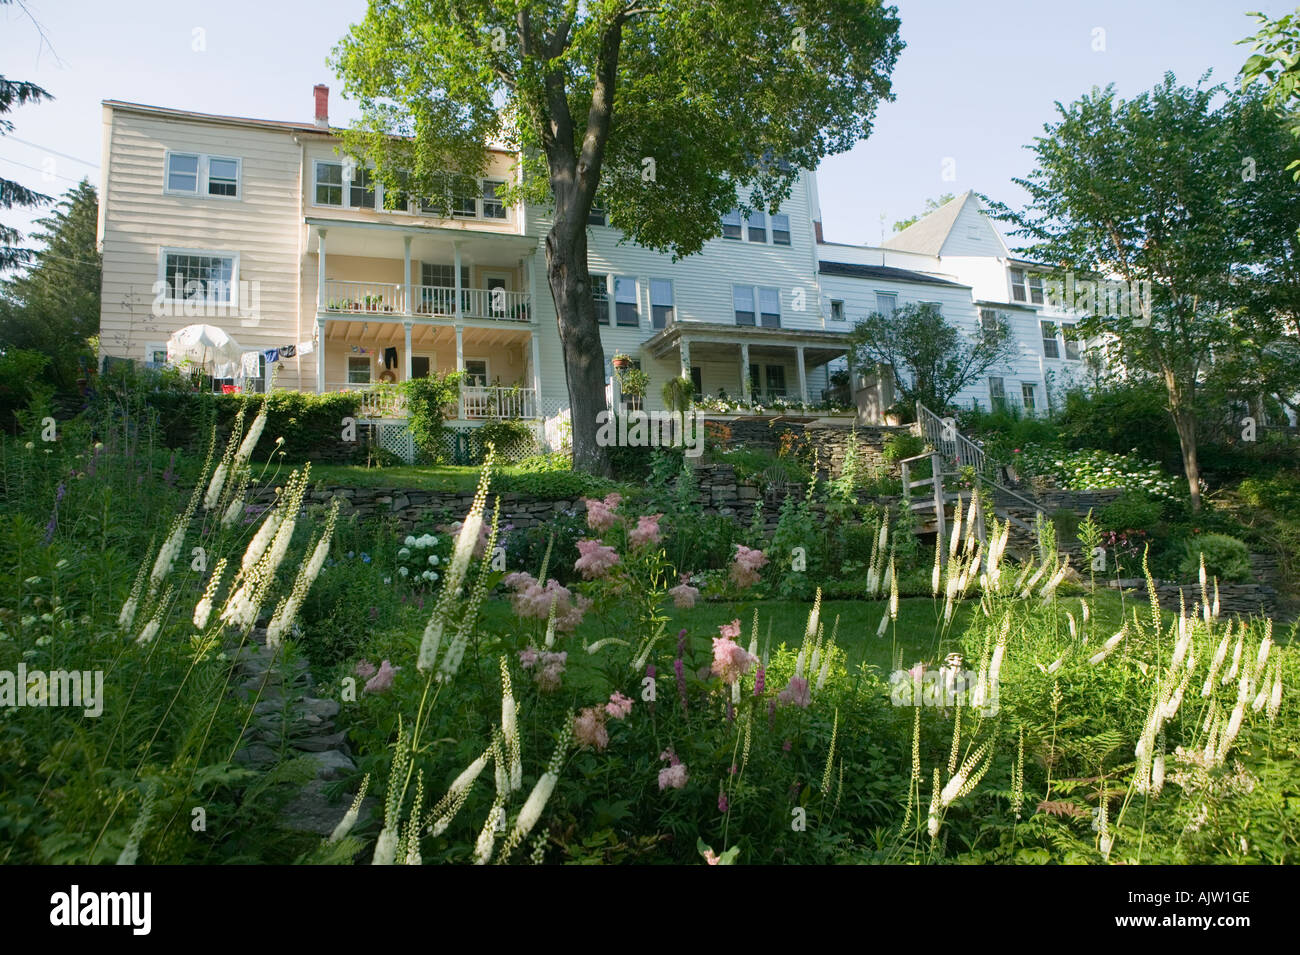 Residences with perennial gardens in posh Rensselaerville Albany County New York Stock Photo